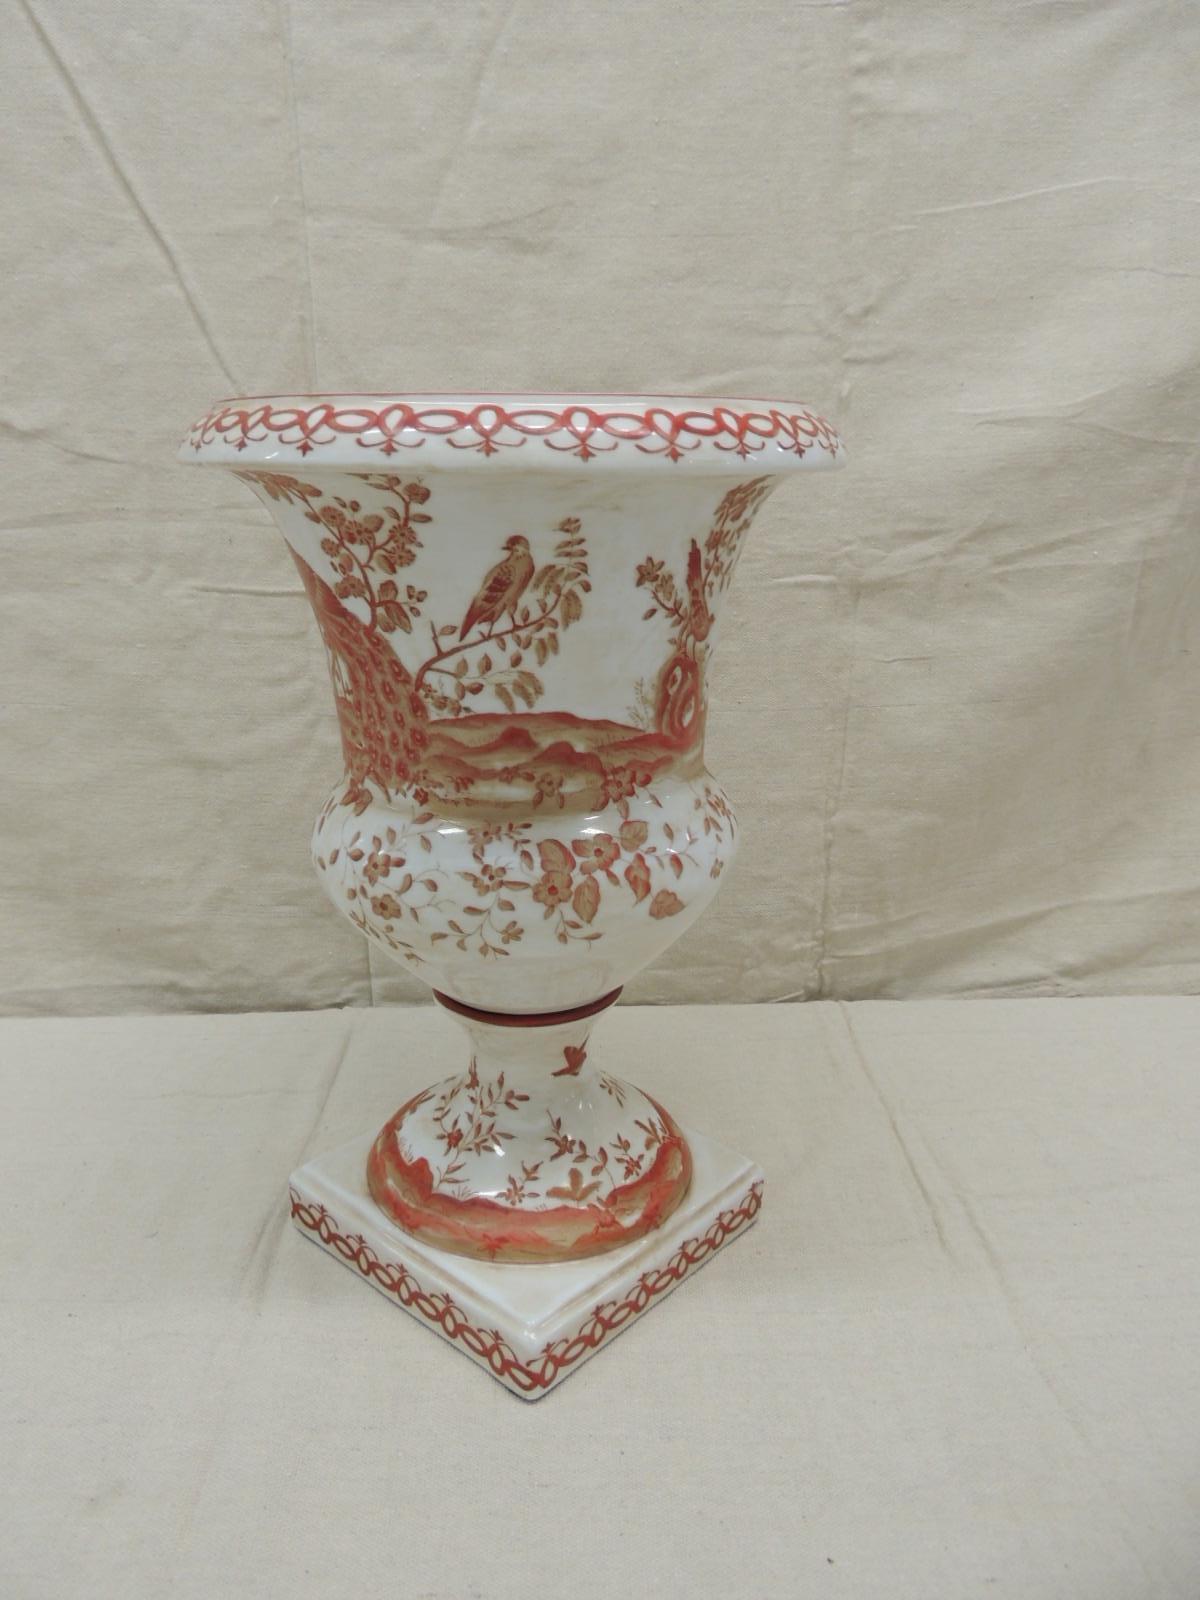 Orange and white ceramic urn
Depicting peacocks and trees
Trellis border on the base and the top ring
Size: 14